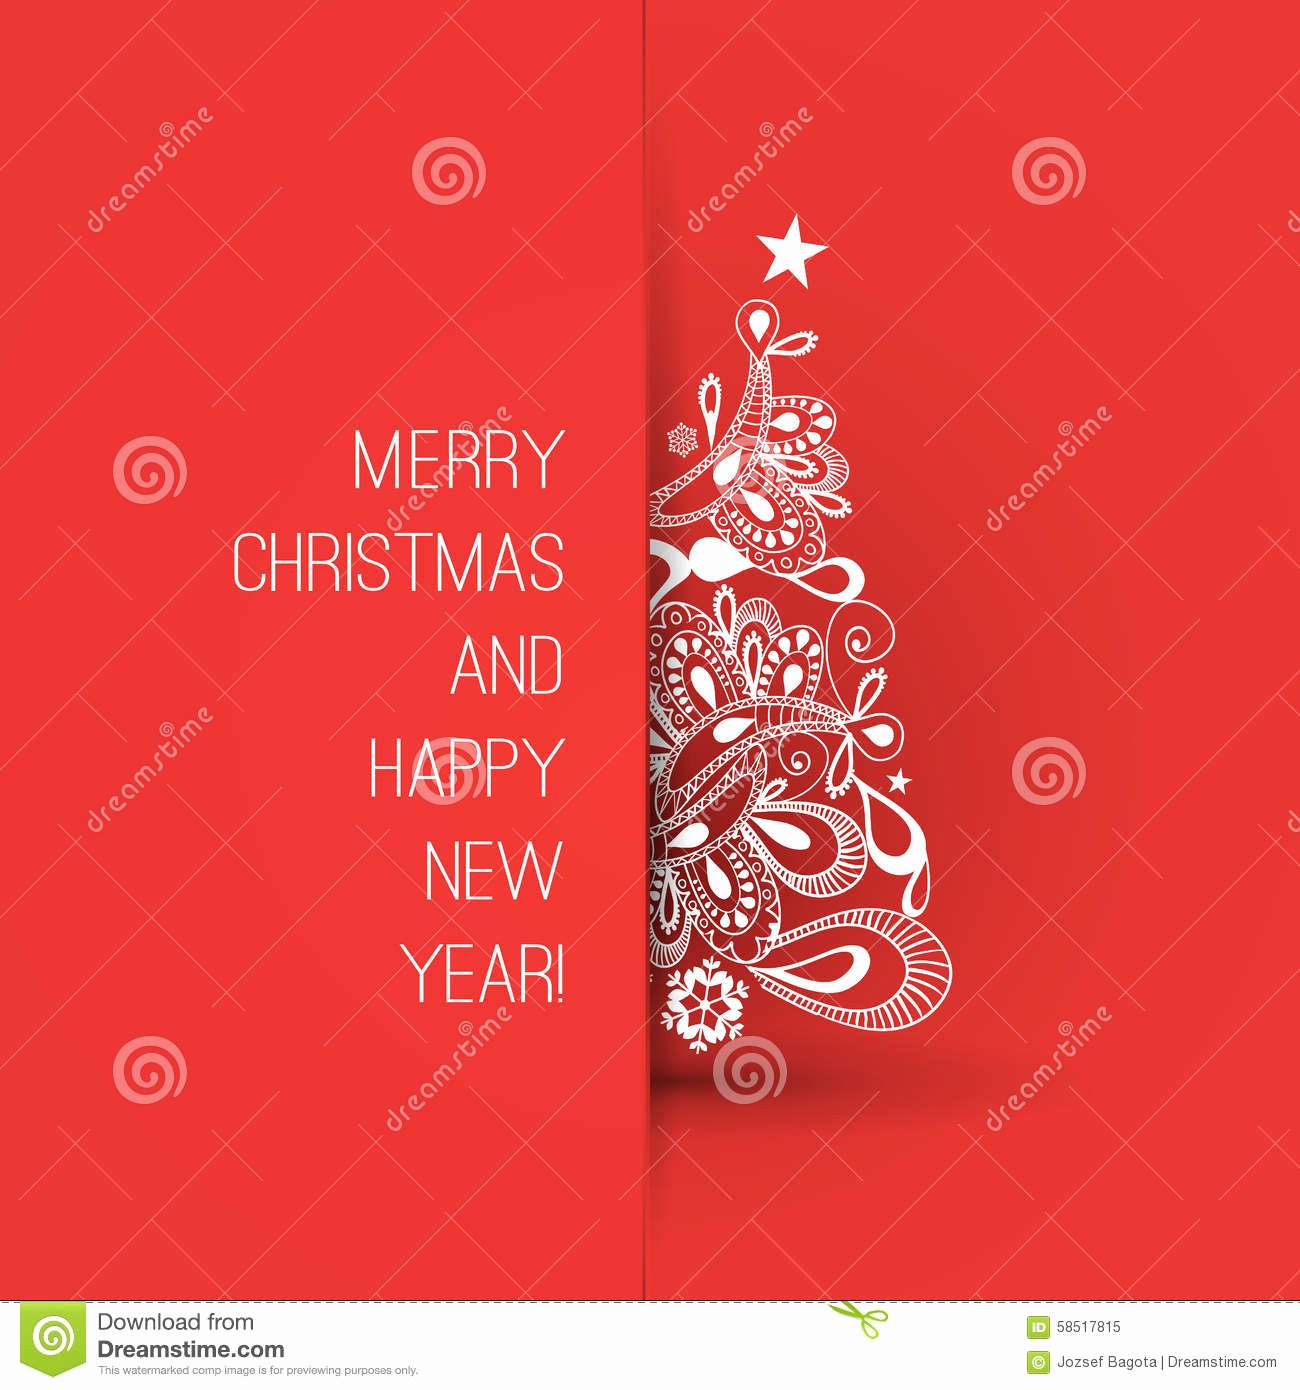 New Year Card Template Fresh Merry Christmas and Happy New Year Greeting Card Creative